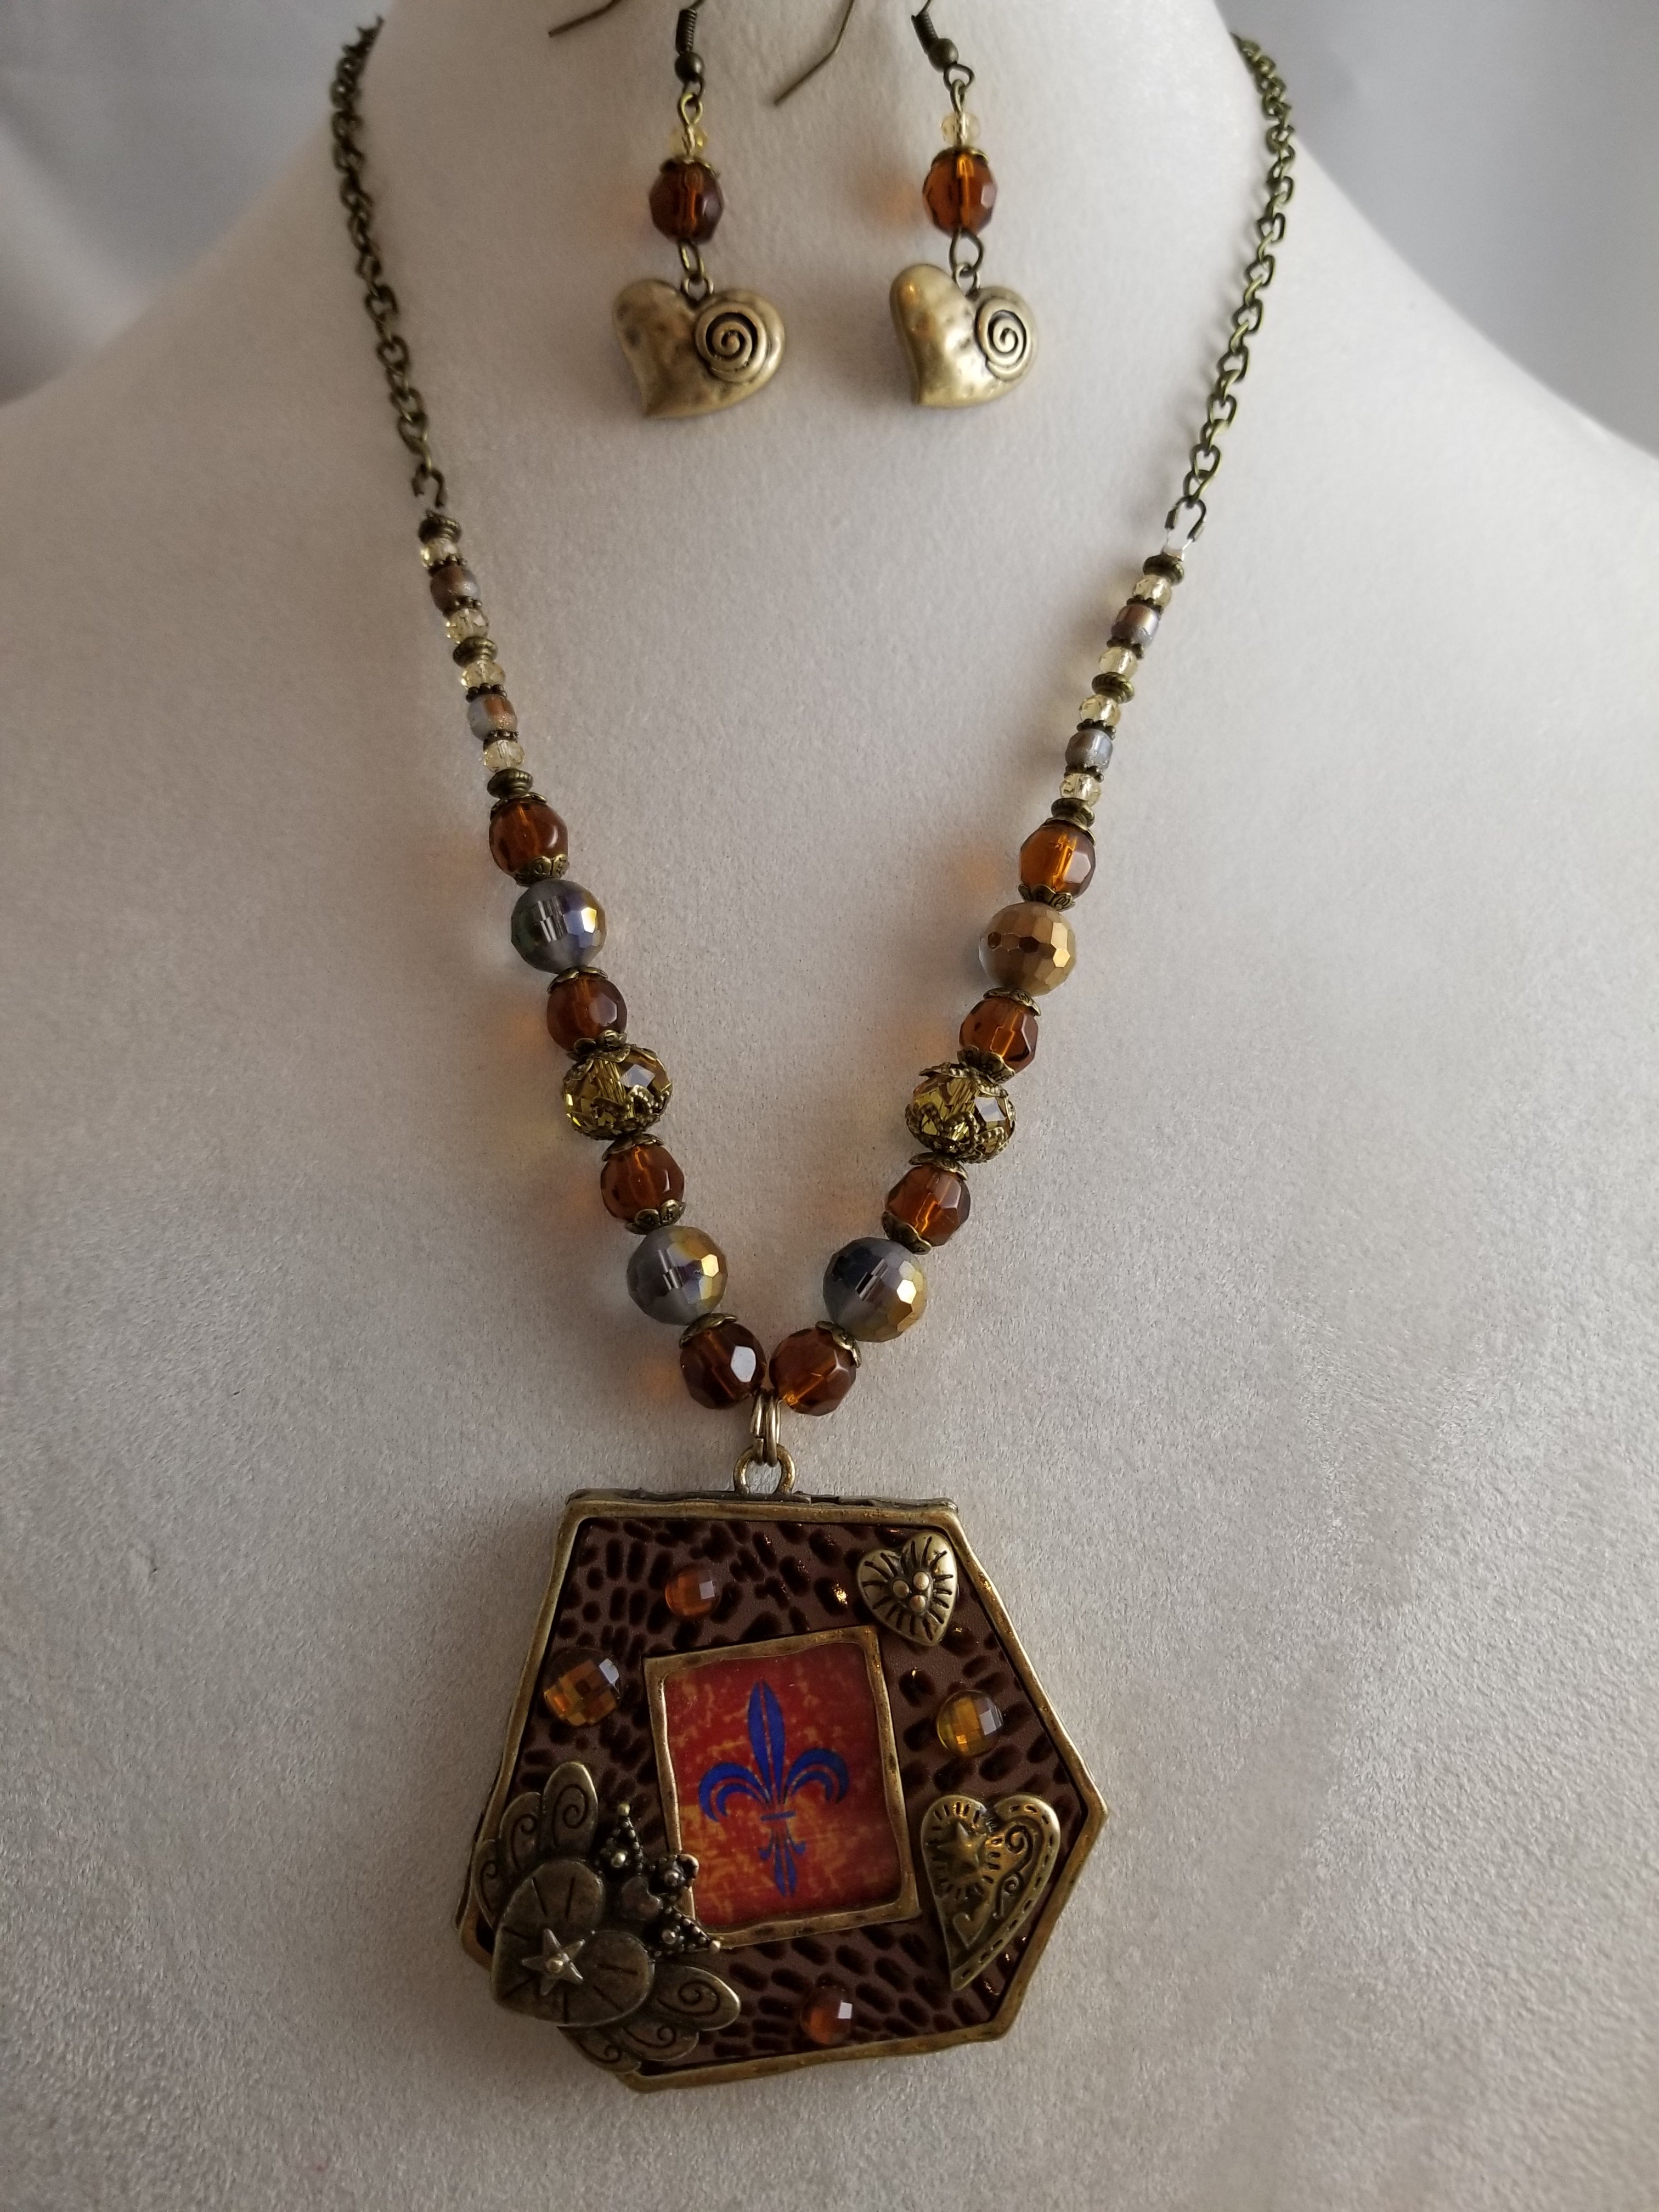 Photo Frame Necklace with Earrings